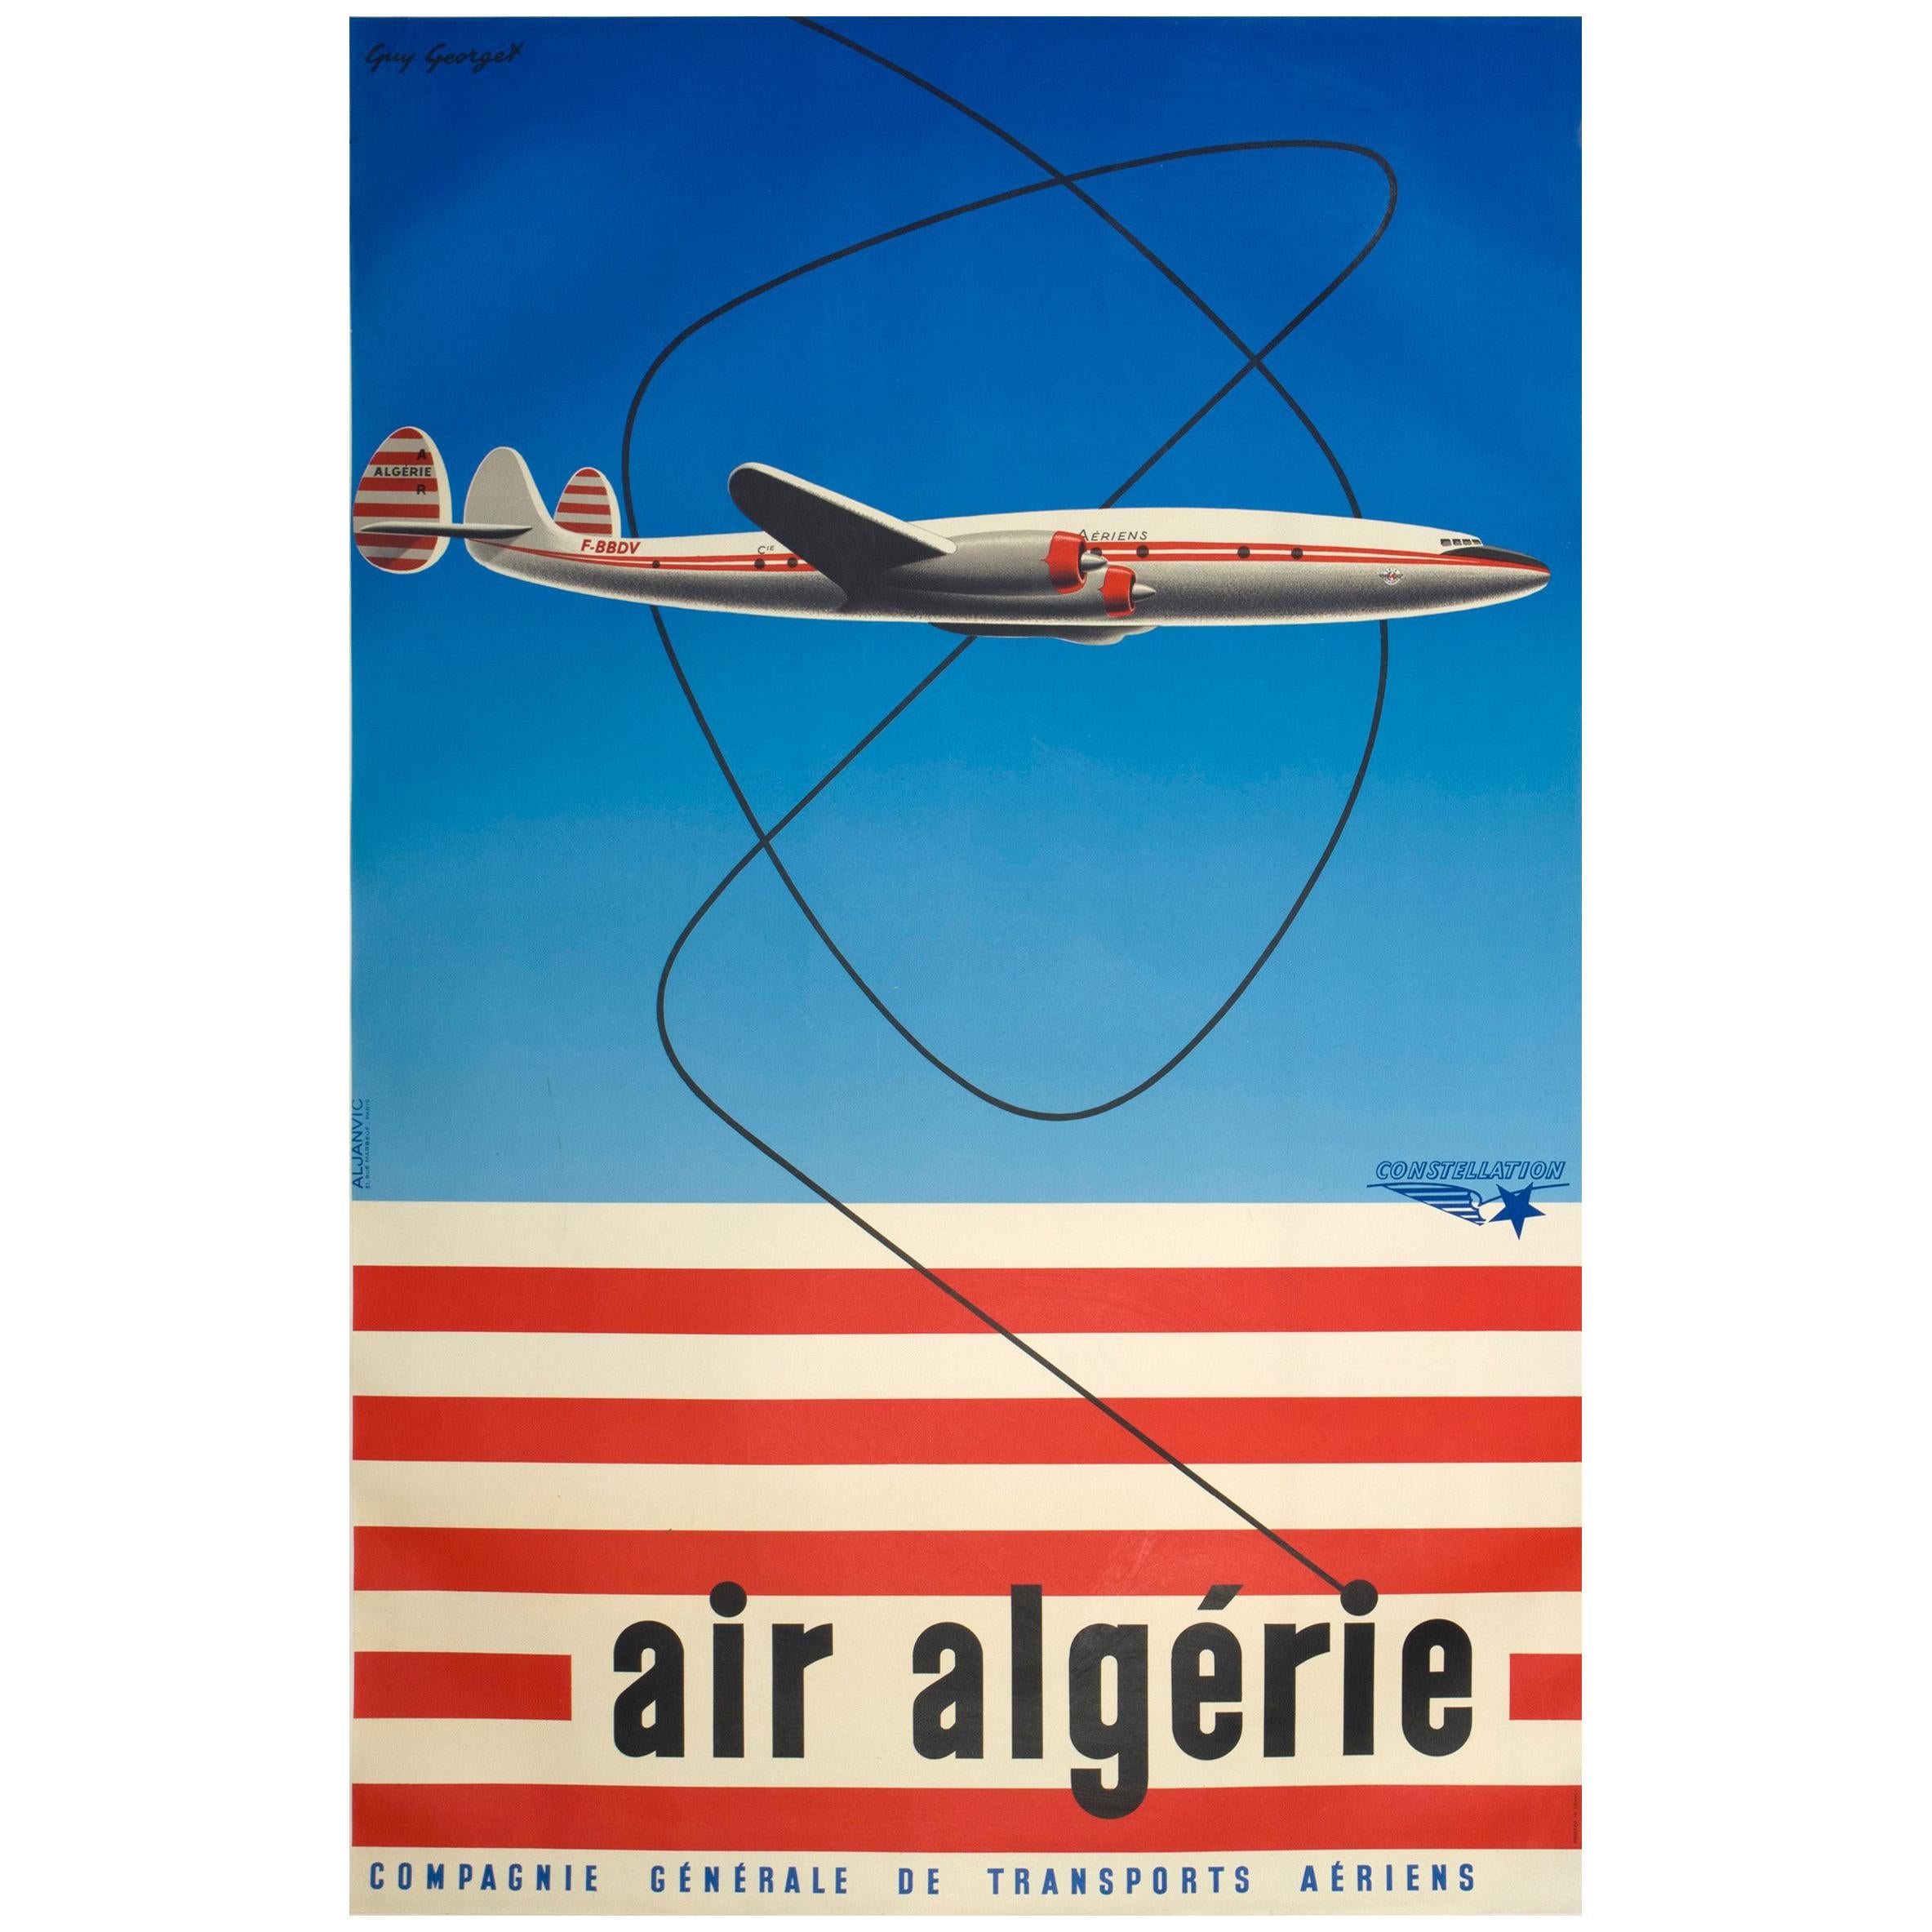 1950s Air Algerie Poster by Georget Featuring a Lockheed Constellation